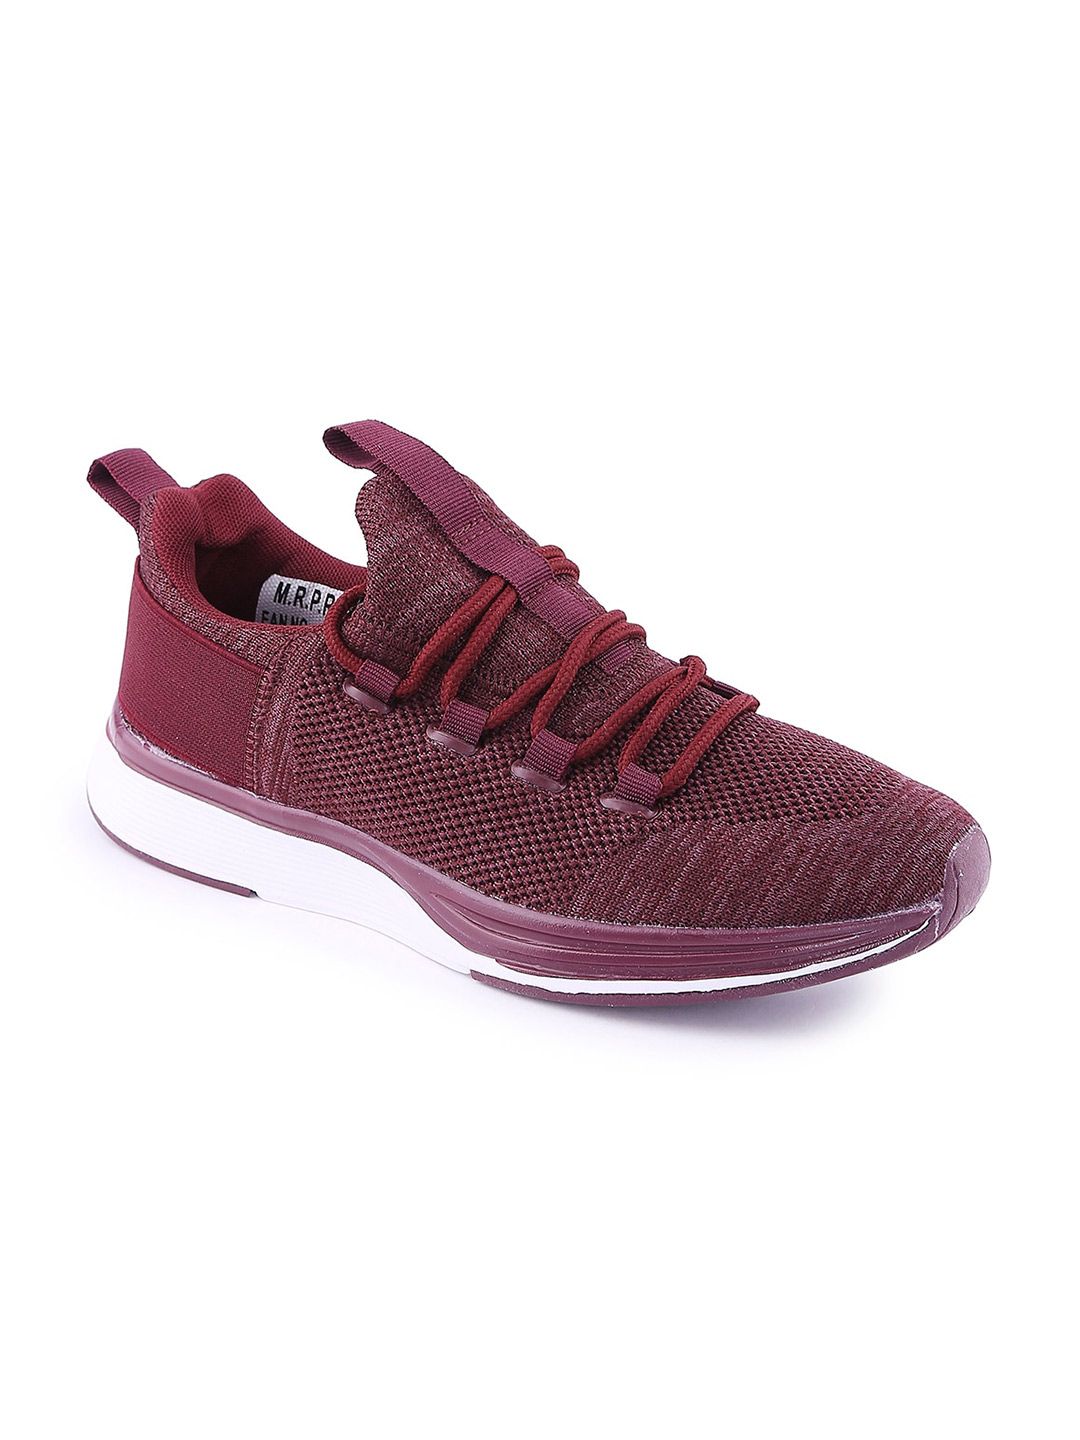 Forever Glam by Pantaloons Women Maroon Textile Walking Shoes Price in India